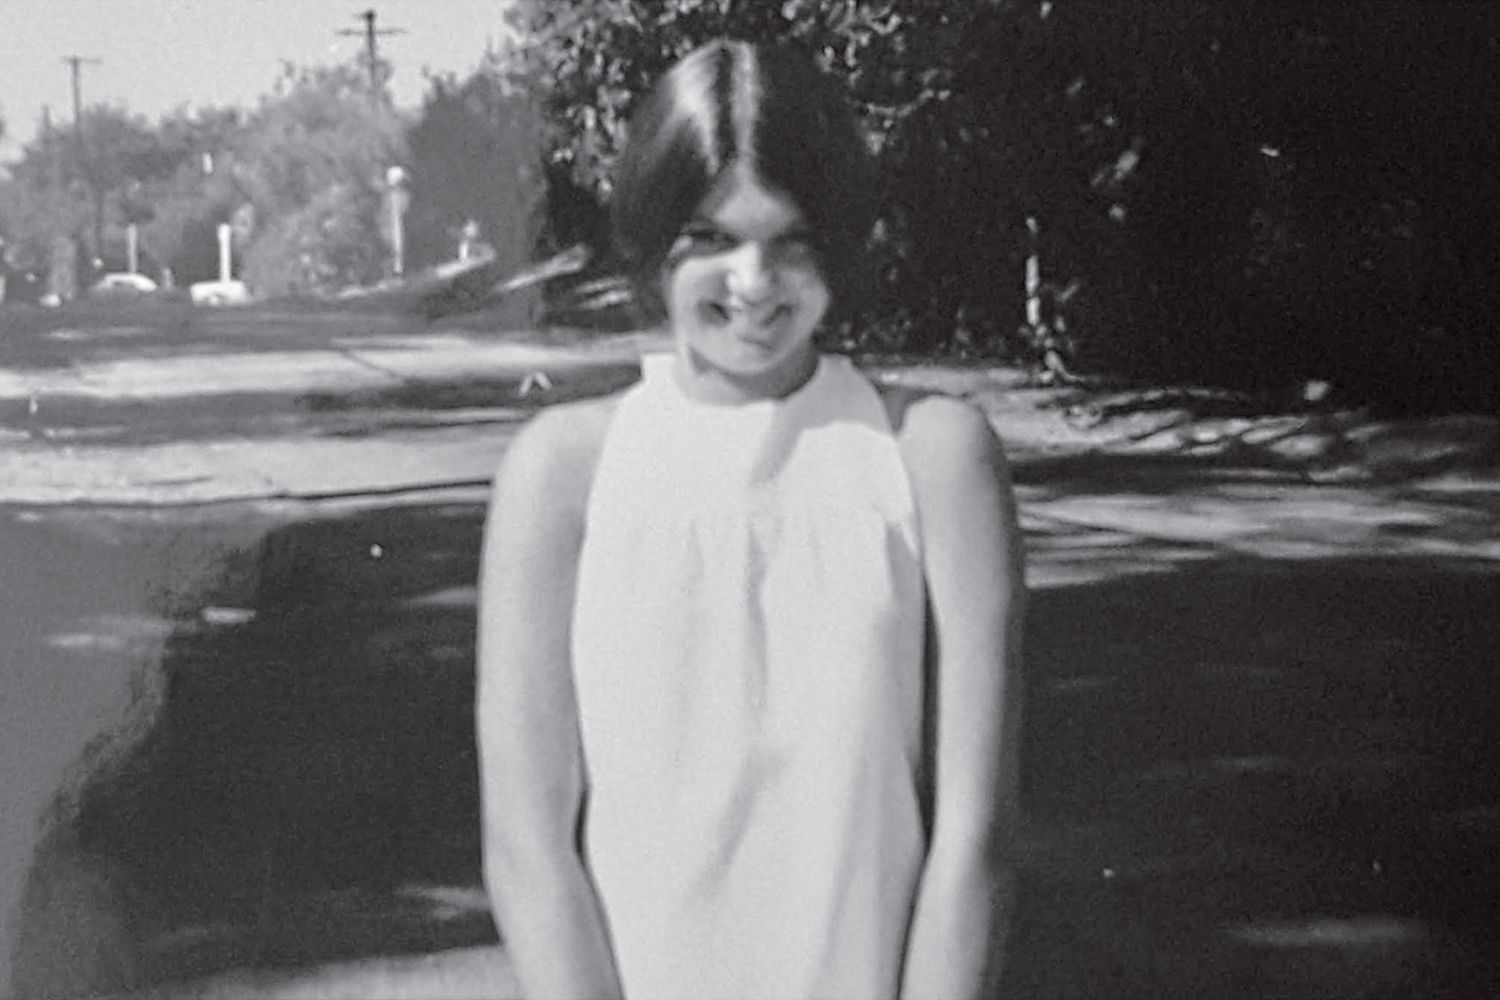 Morgan Rowan who survived the Dating Game serial killer Rodney Alcala. June1968, a few months before the 2nd attack. Age 16, near home in No. Hollywood.